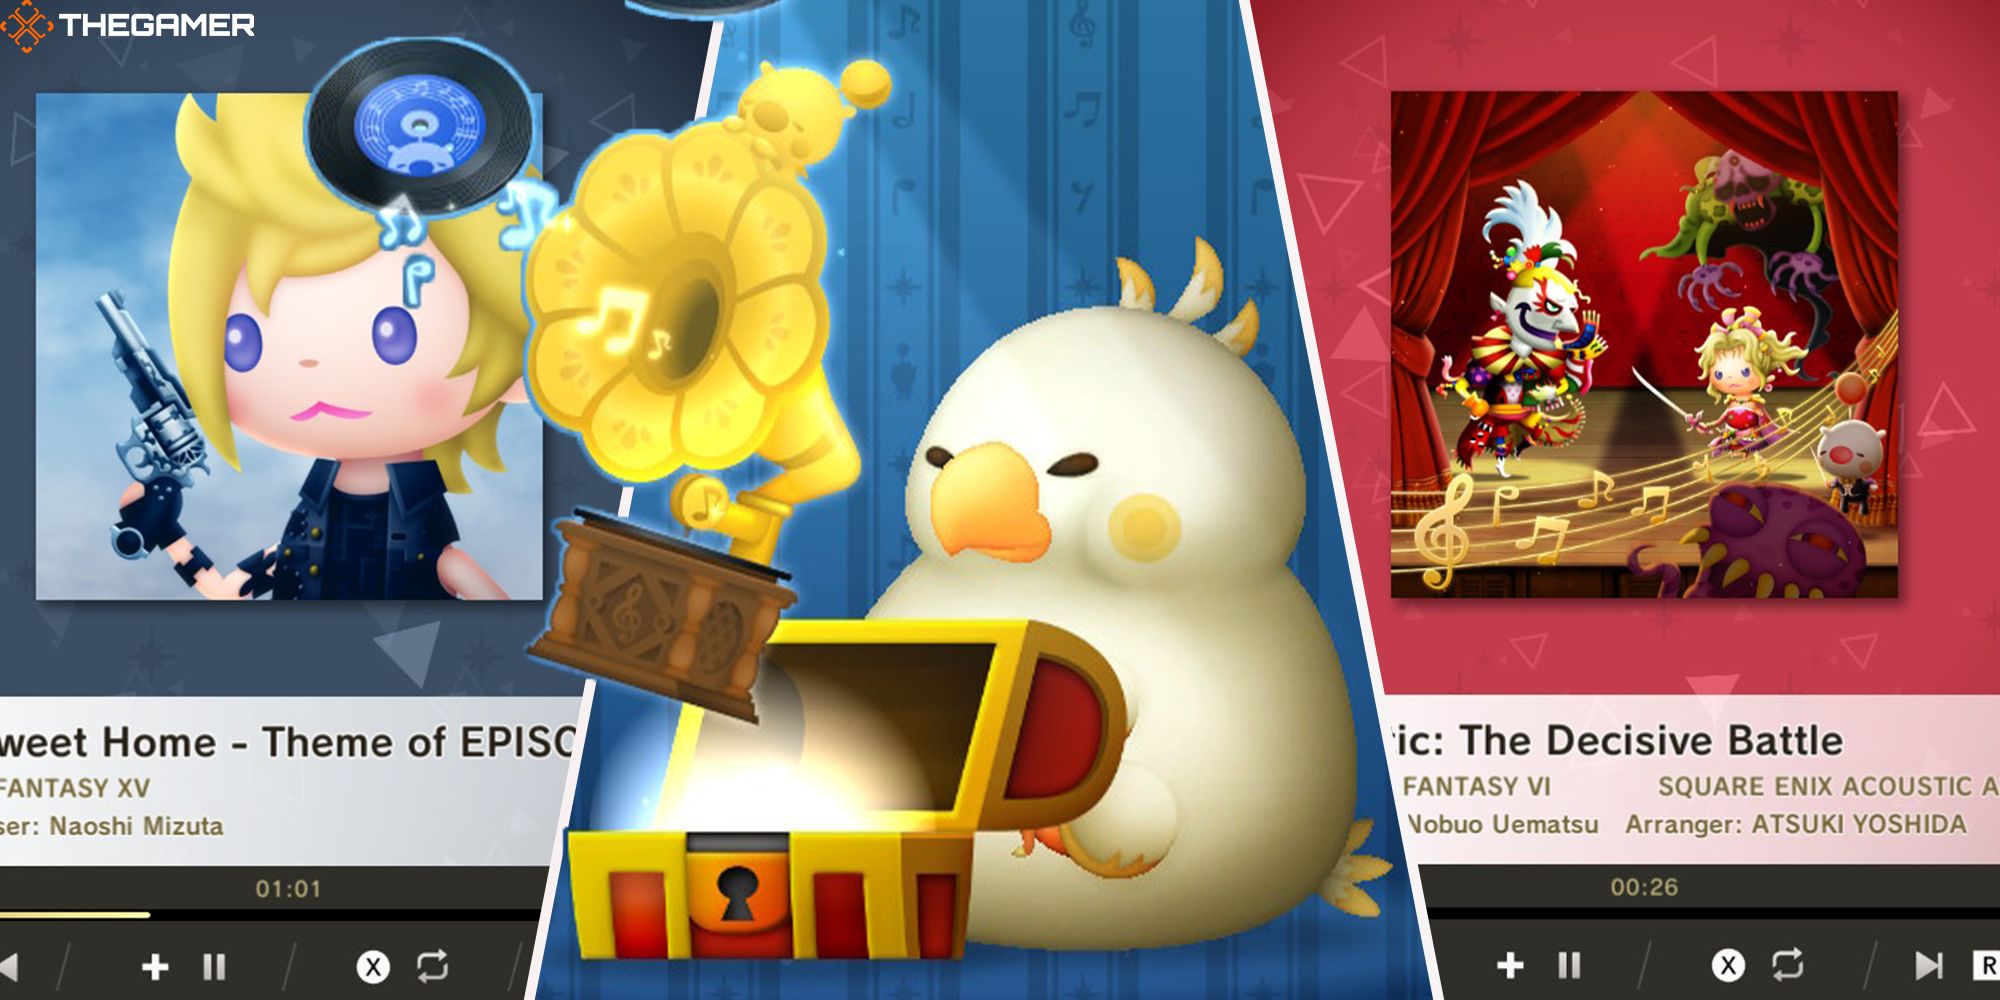 A fat Chocobo sits between two album covers and reveals a gramophone from a treasure chest in this featured image for Theatrhythm: Final Bar Line.